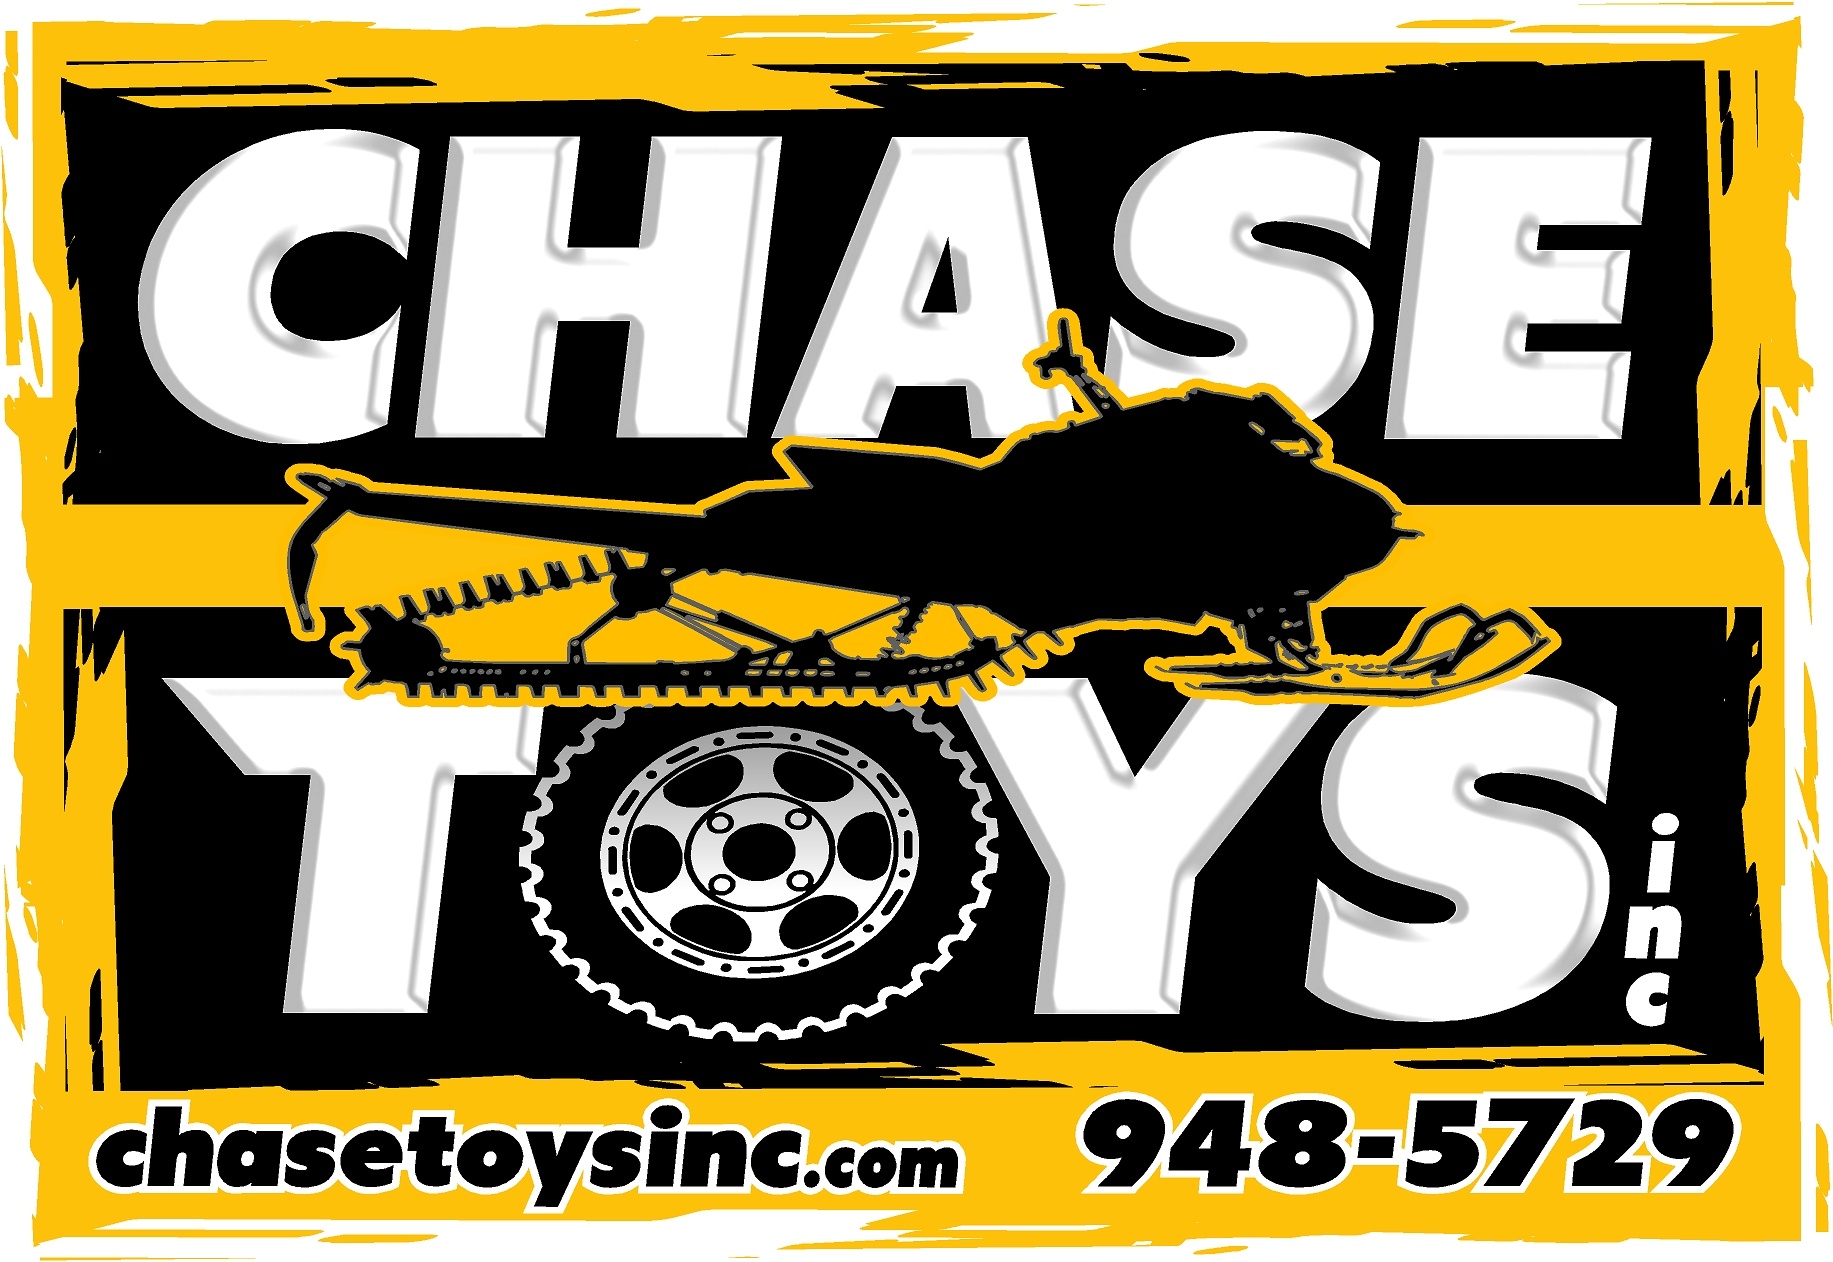 ChaseToysInc |  [Dealername] in [city], [state]. Shop Our Large Online Inventory